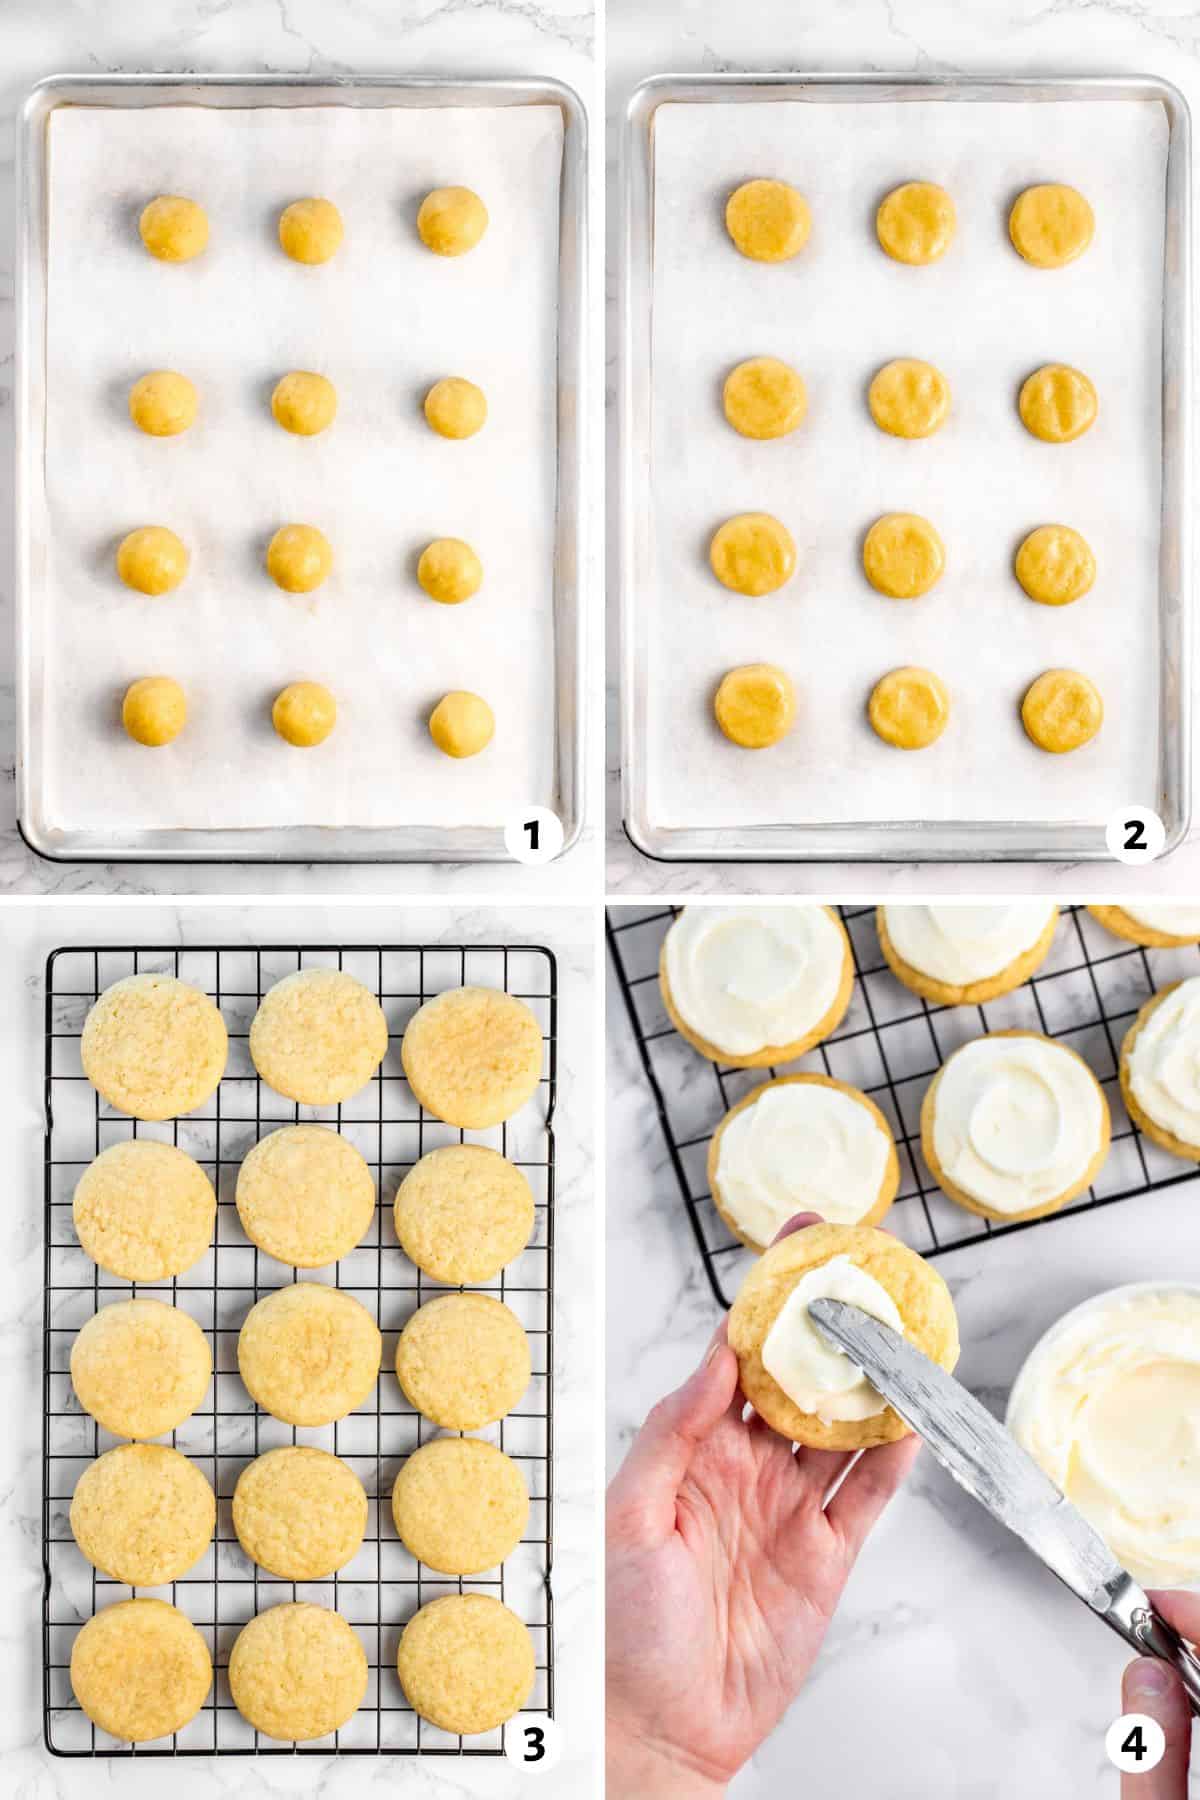 4 image collage making recipe: 1- dough balls on a parchment lined baking sheet, 2- balls flattened slightly into round discs before baking, 3- after baking on a cooling rack, 4- spreading frosting with a knife on one cookie with more cookies already frosted on wire rack.